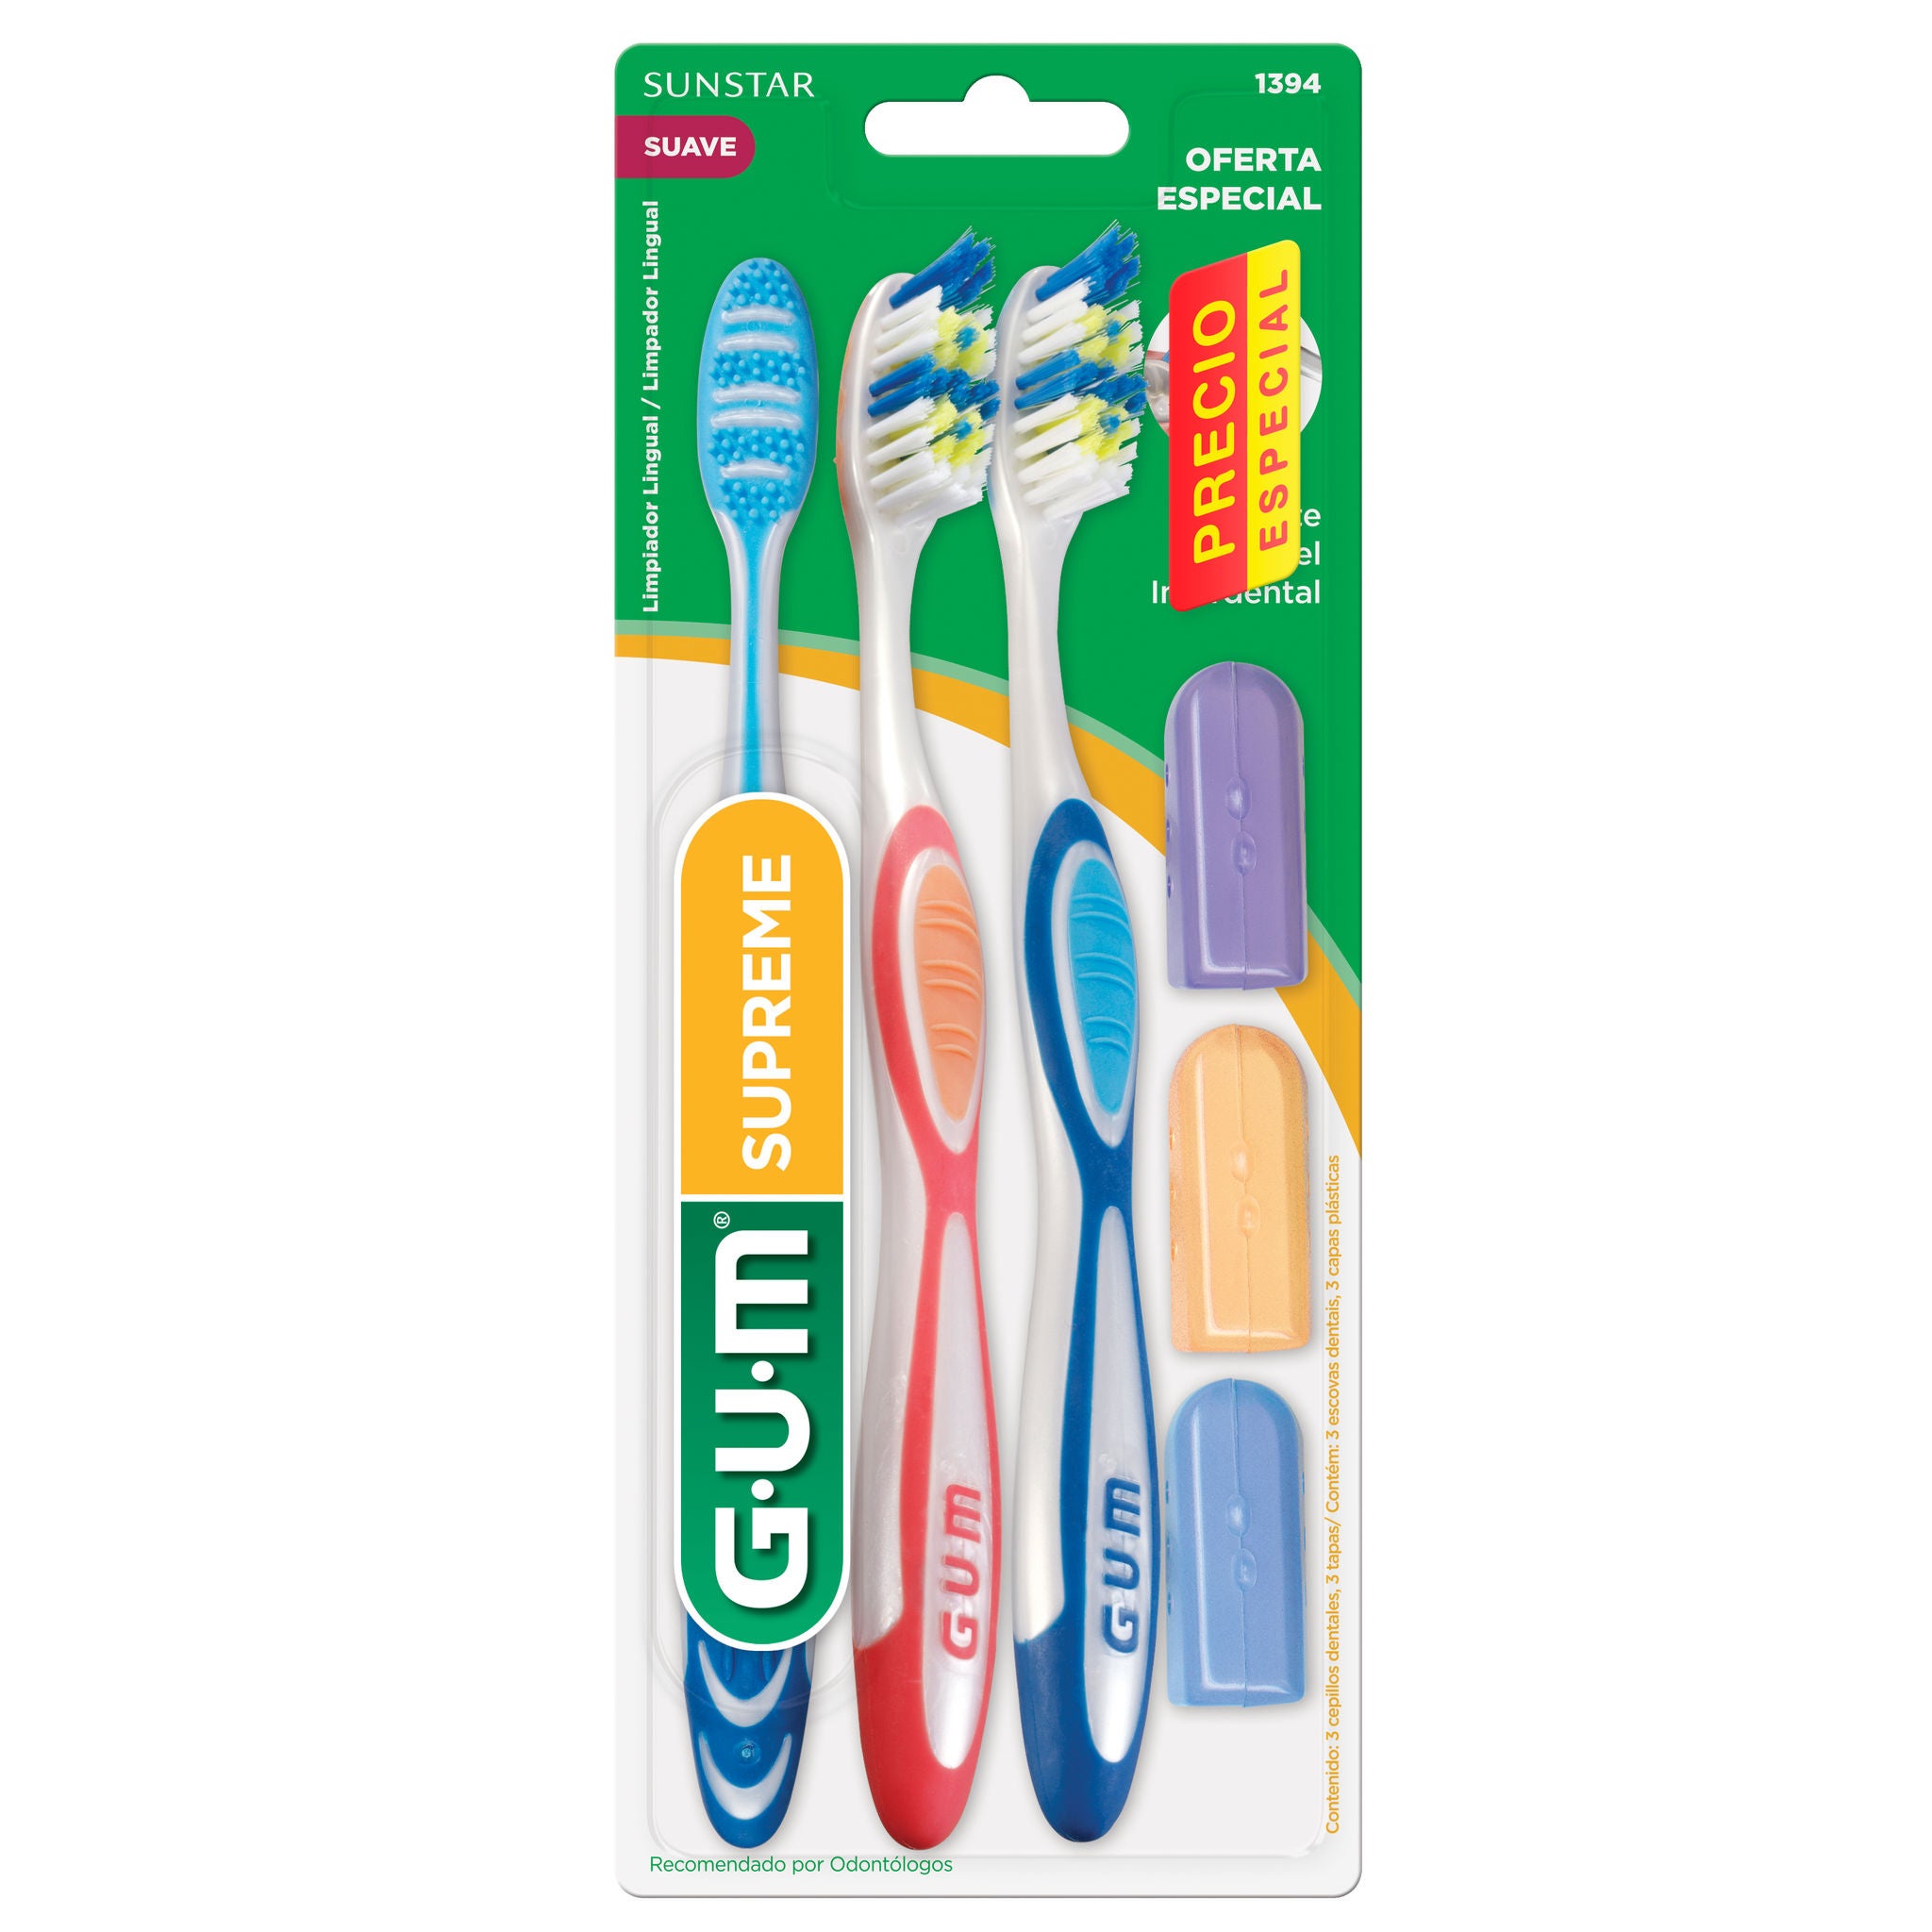 1396LA3Z-Product-Packaging-Toothbrush-Supreme-front-3x2.jpg